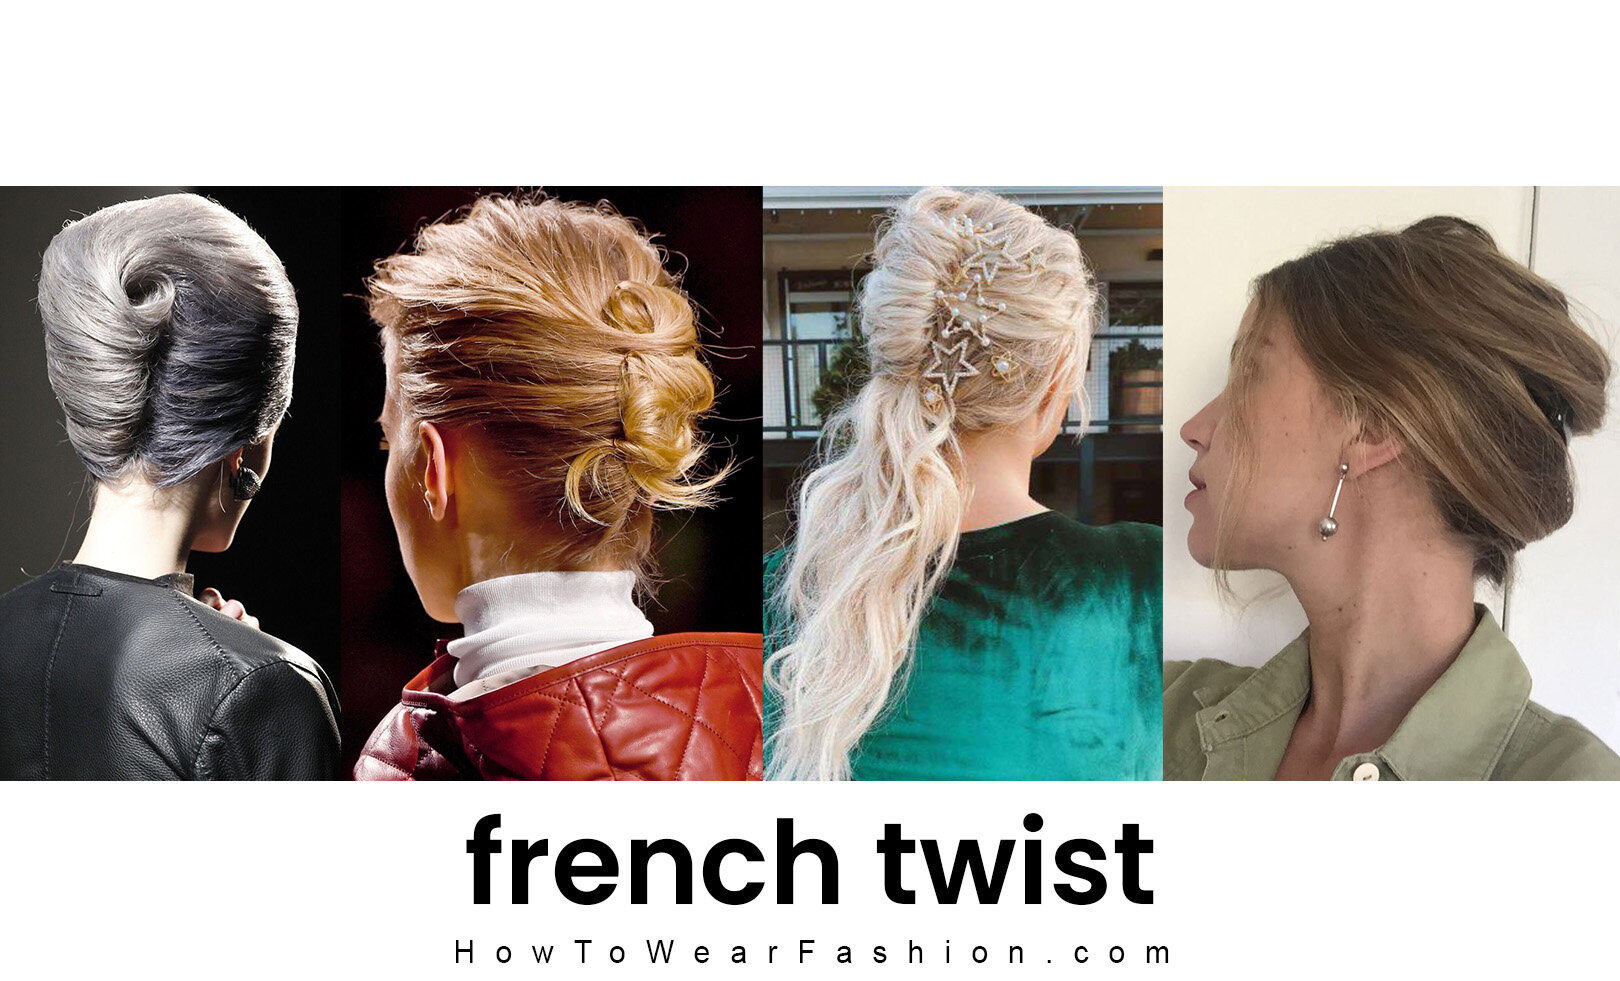 French twist hairstyle - The classic updo for long and short hair